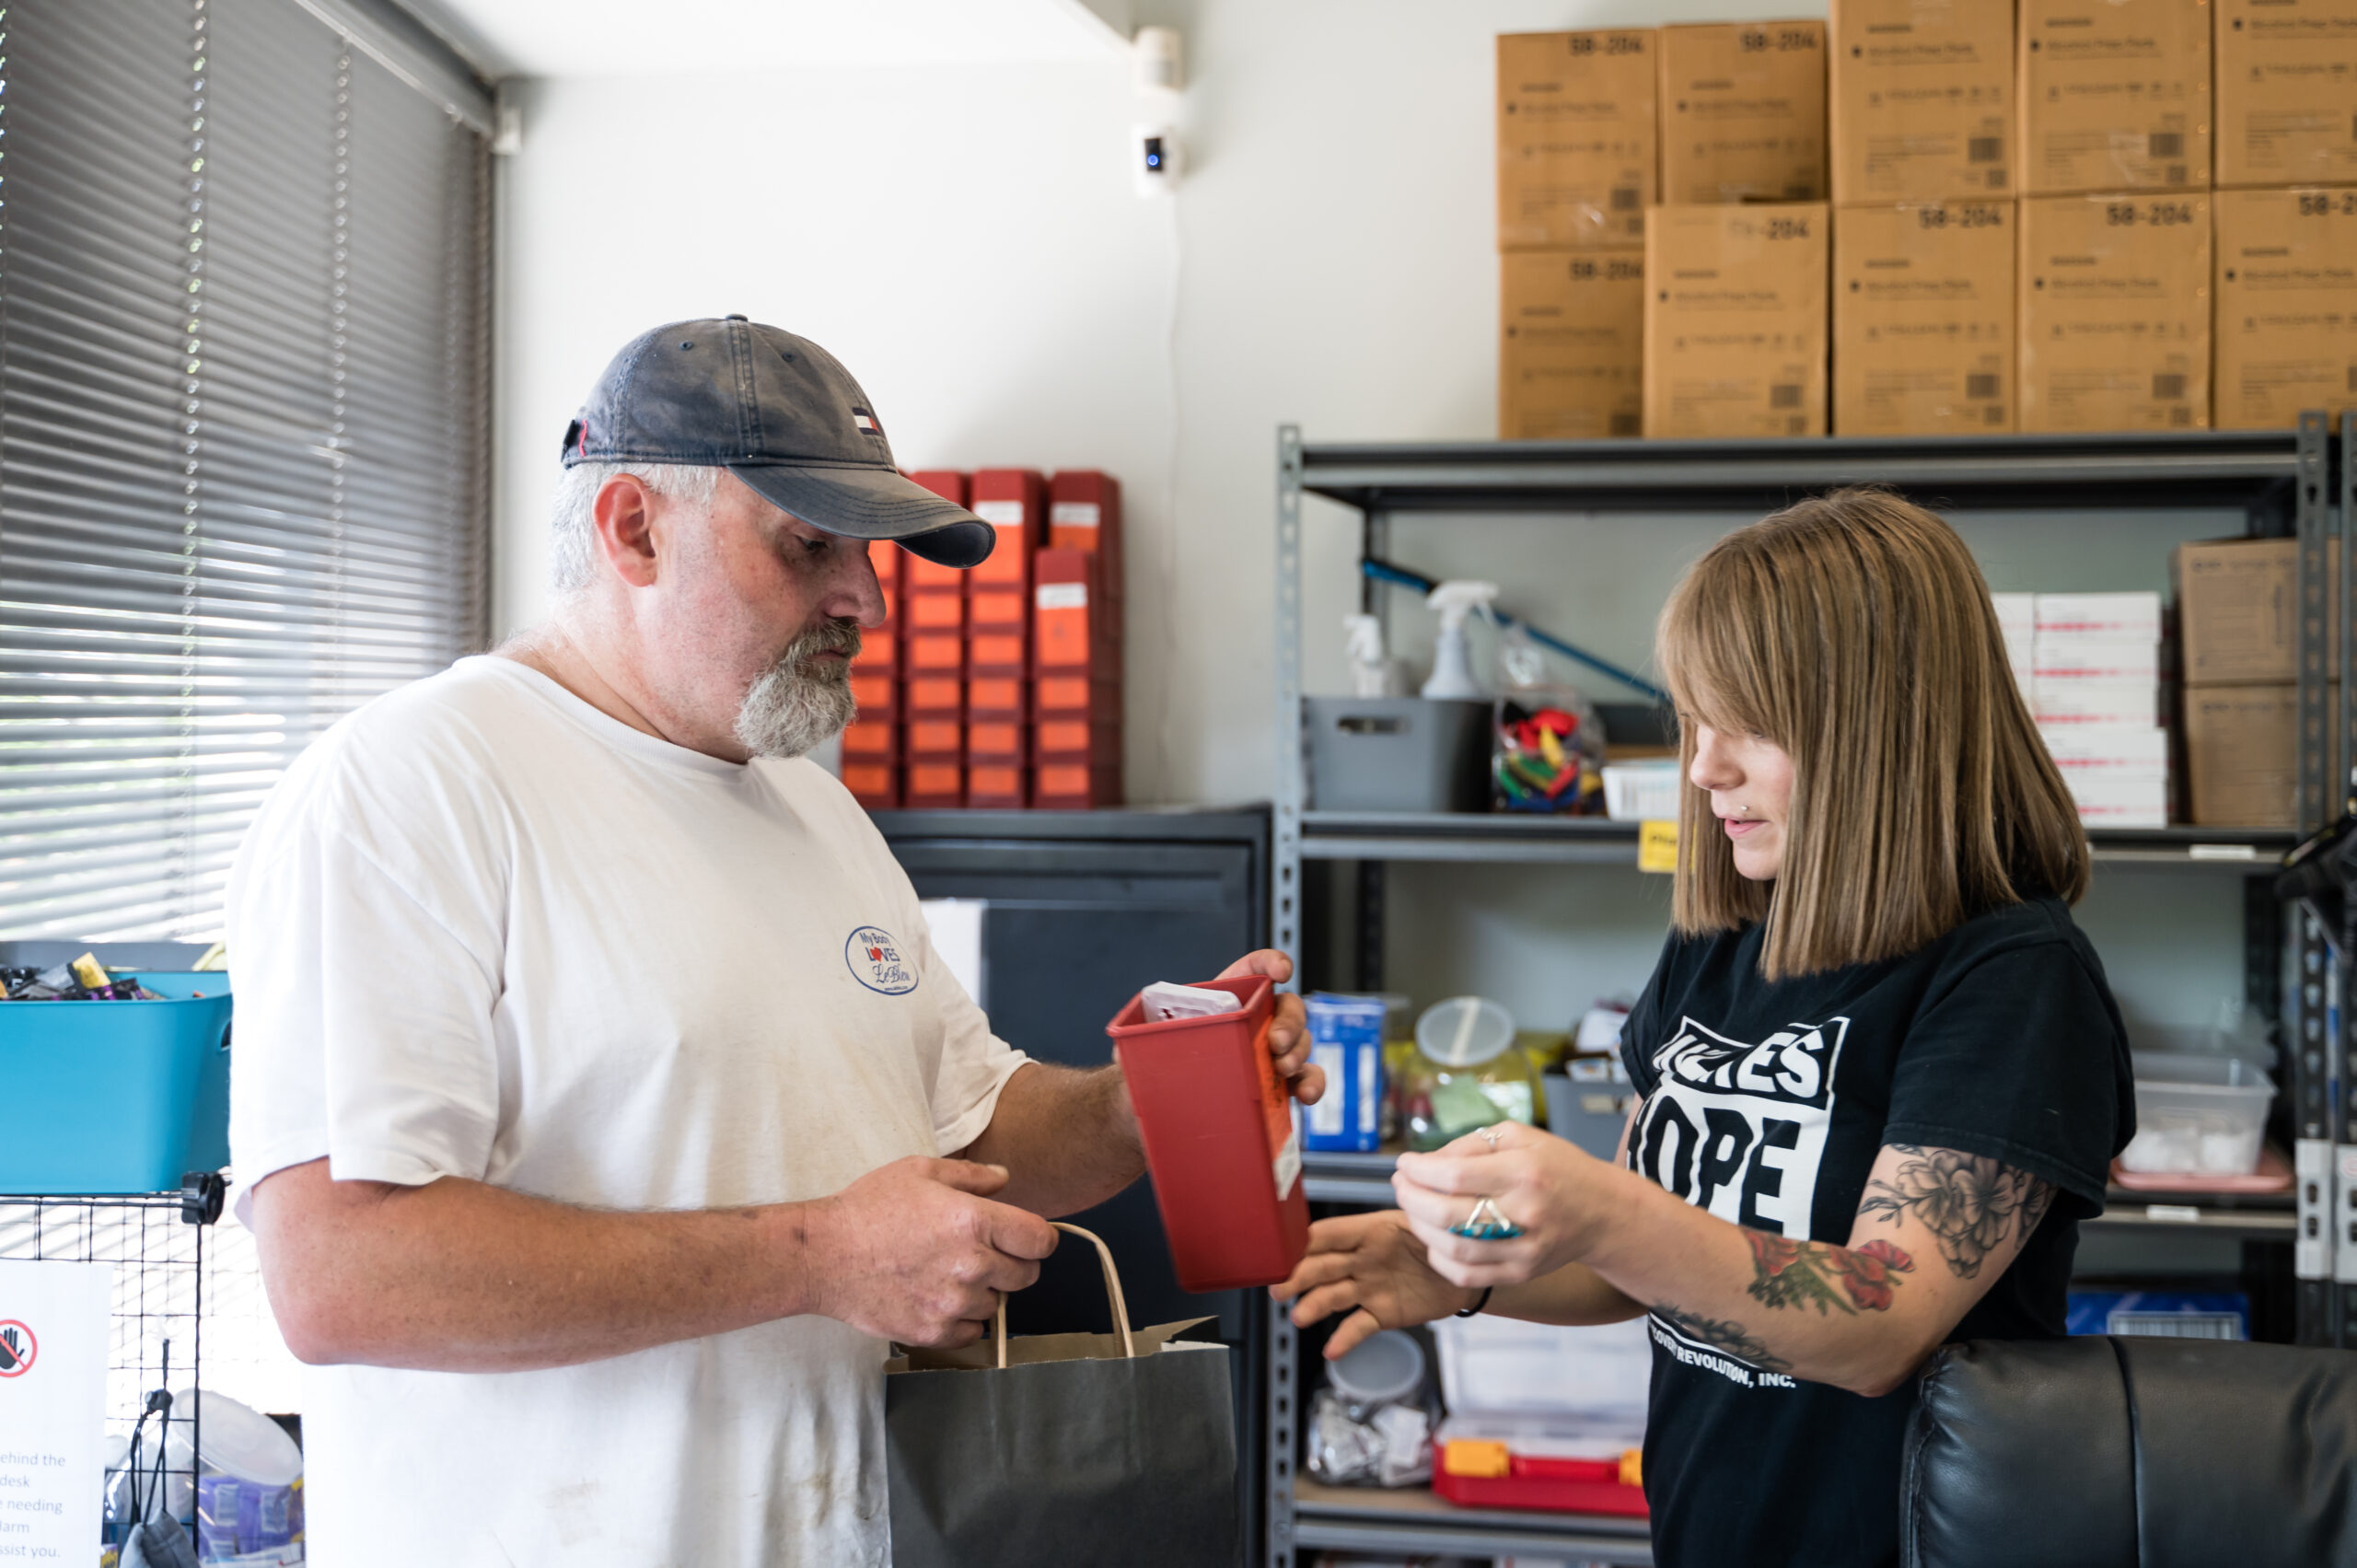 Ericka Minton, a harm reductionist at WRR, provides assistance to peers in recovery, including syringe exchange, wound care and free Naloxone kits, which reverse opioid overdoses.